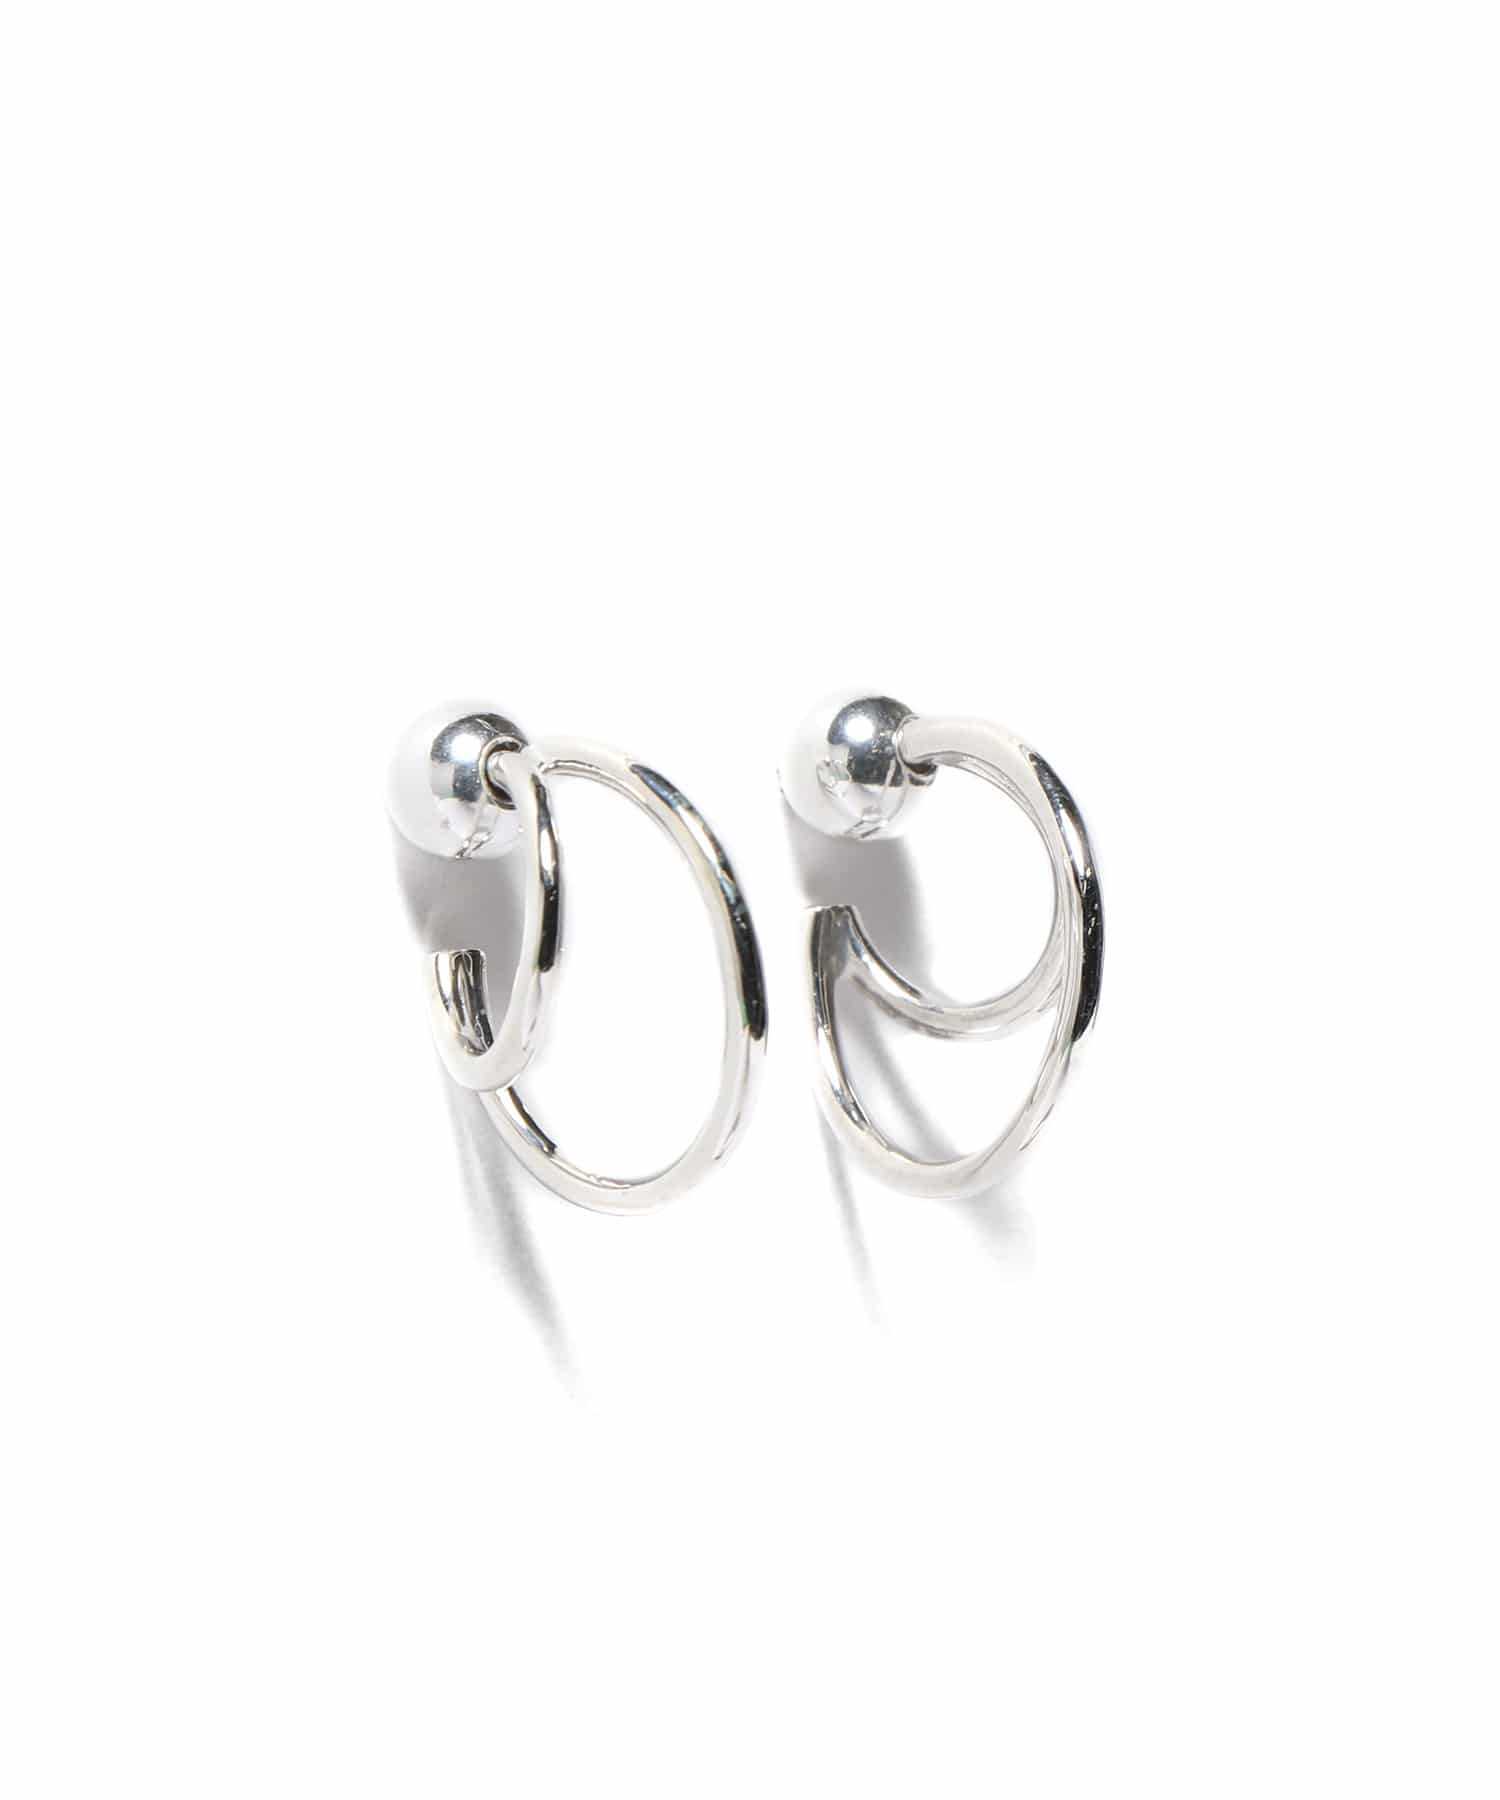 ”Small Double Layered Hoops” ピアス 詳細画像 シルバー 1